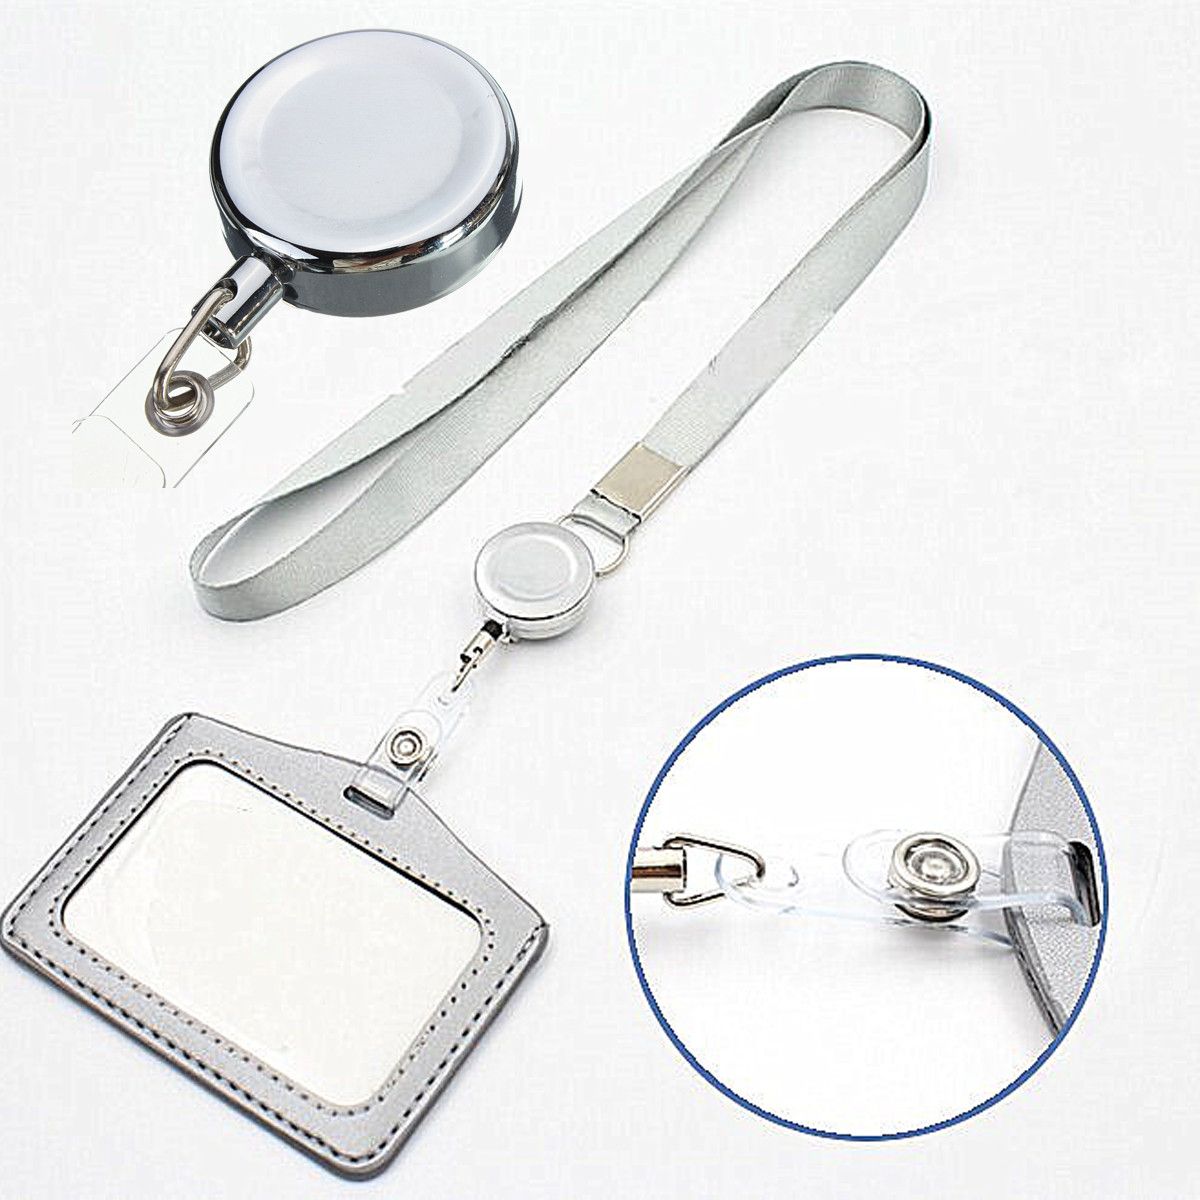 30mm-Metal-Retractable-Pull-Chain-Reel-ID-Card-Badge-Holder-Recoil-Belt-Key-Clip-1374104